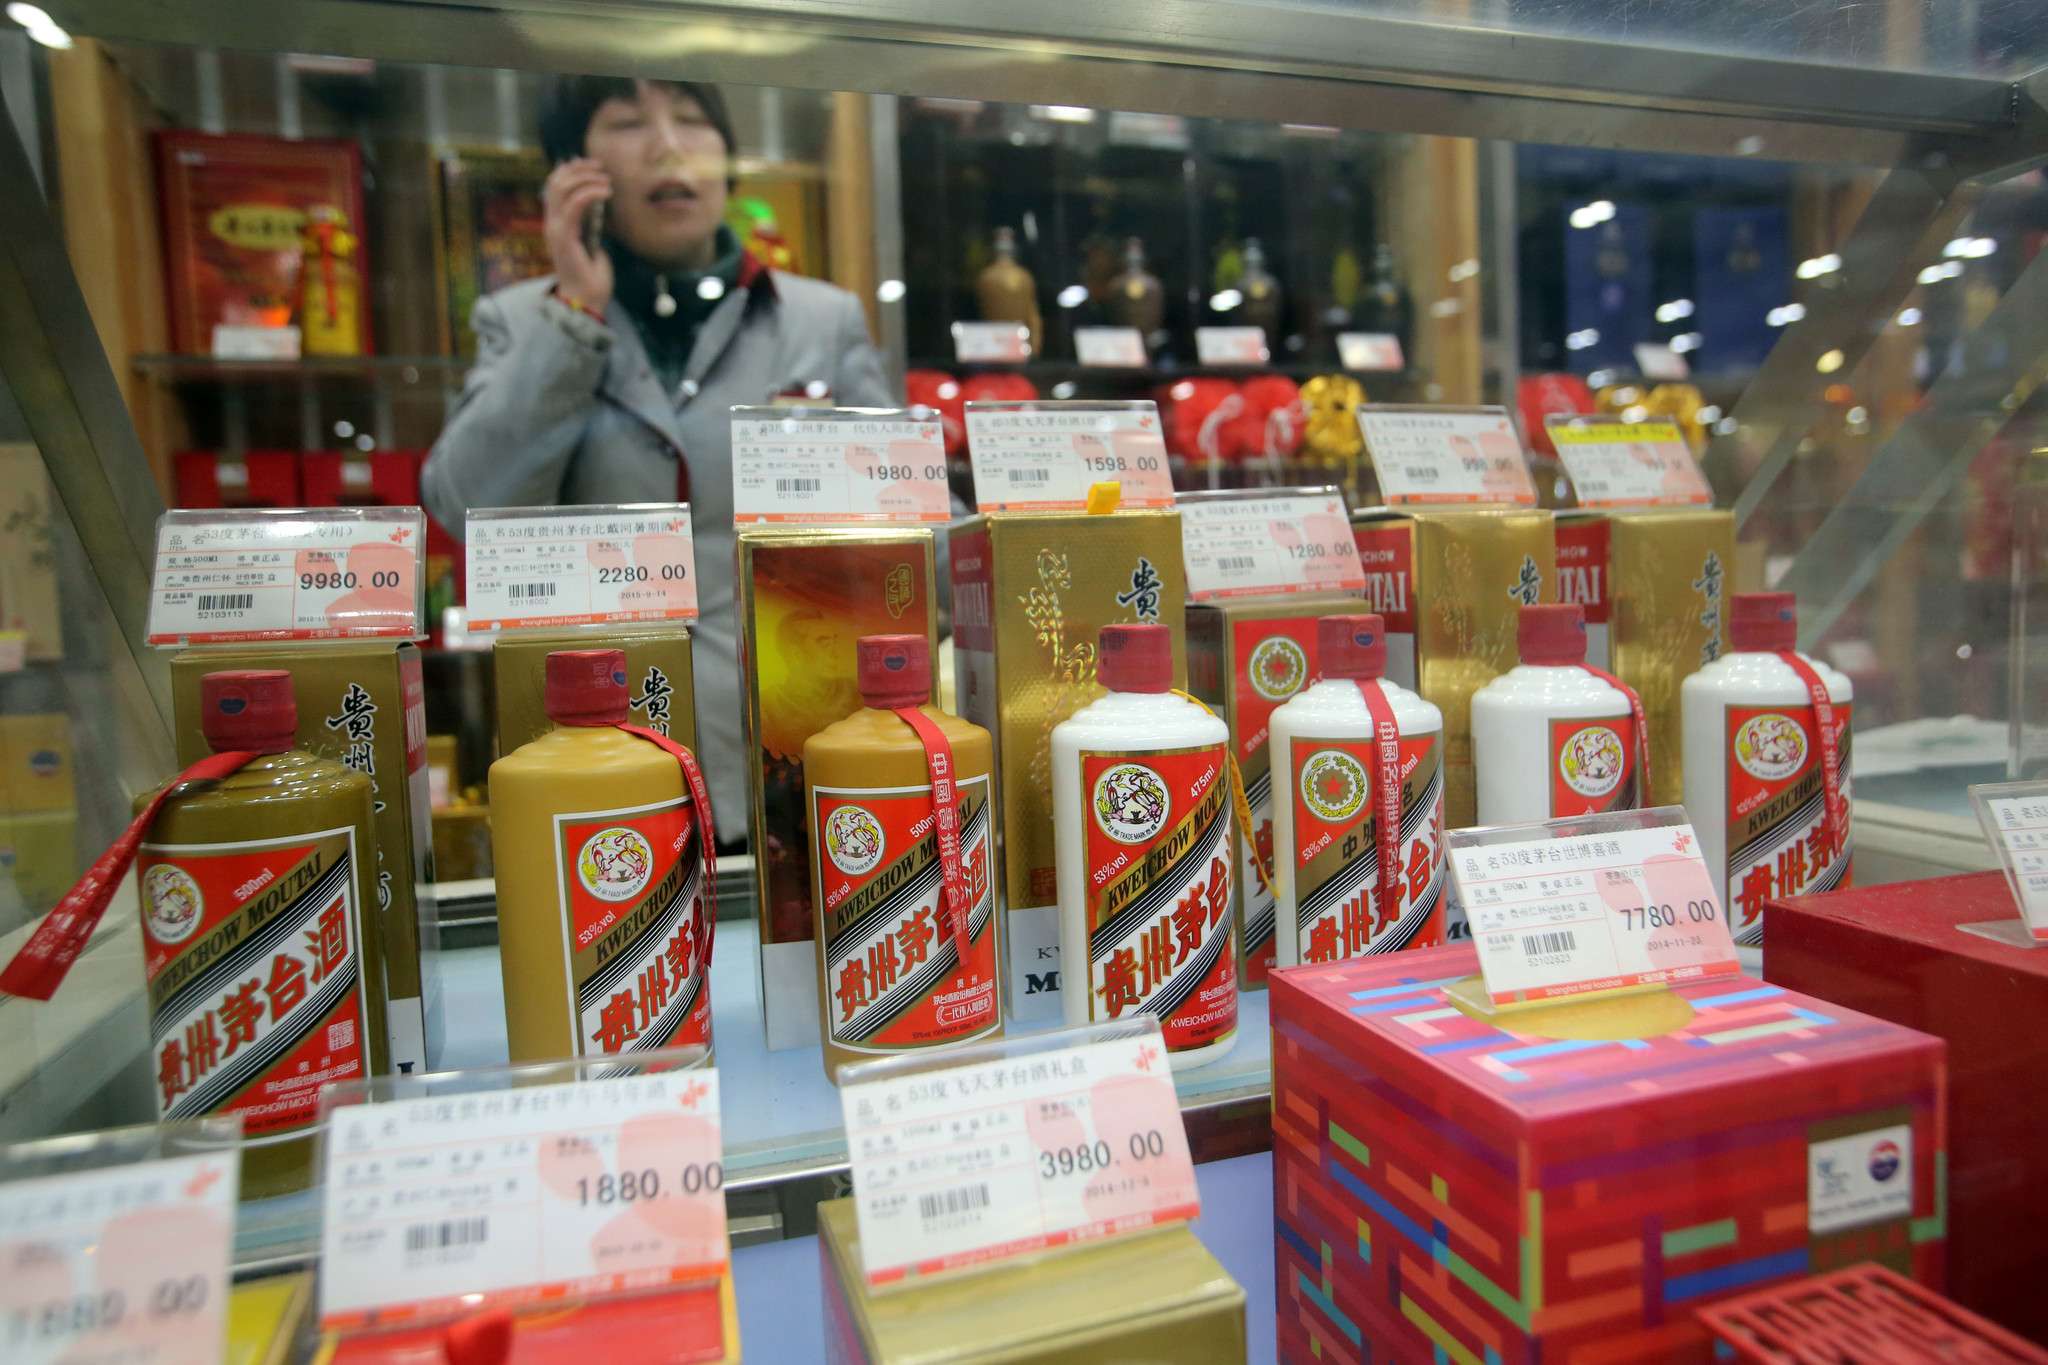 Kweichow Moutai, producer of a popular brand of baijiu, should benefit from rising affluence among China’s middle class, according to HSBC. Photo: Imaginechina